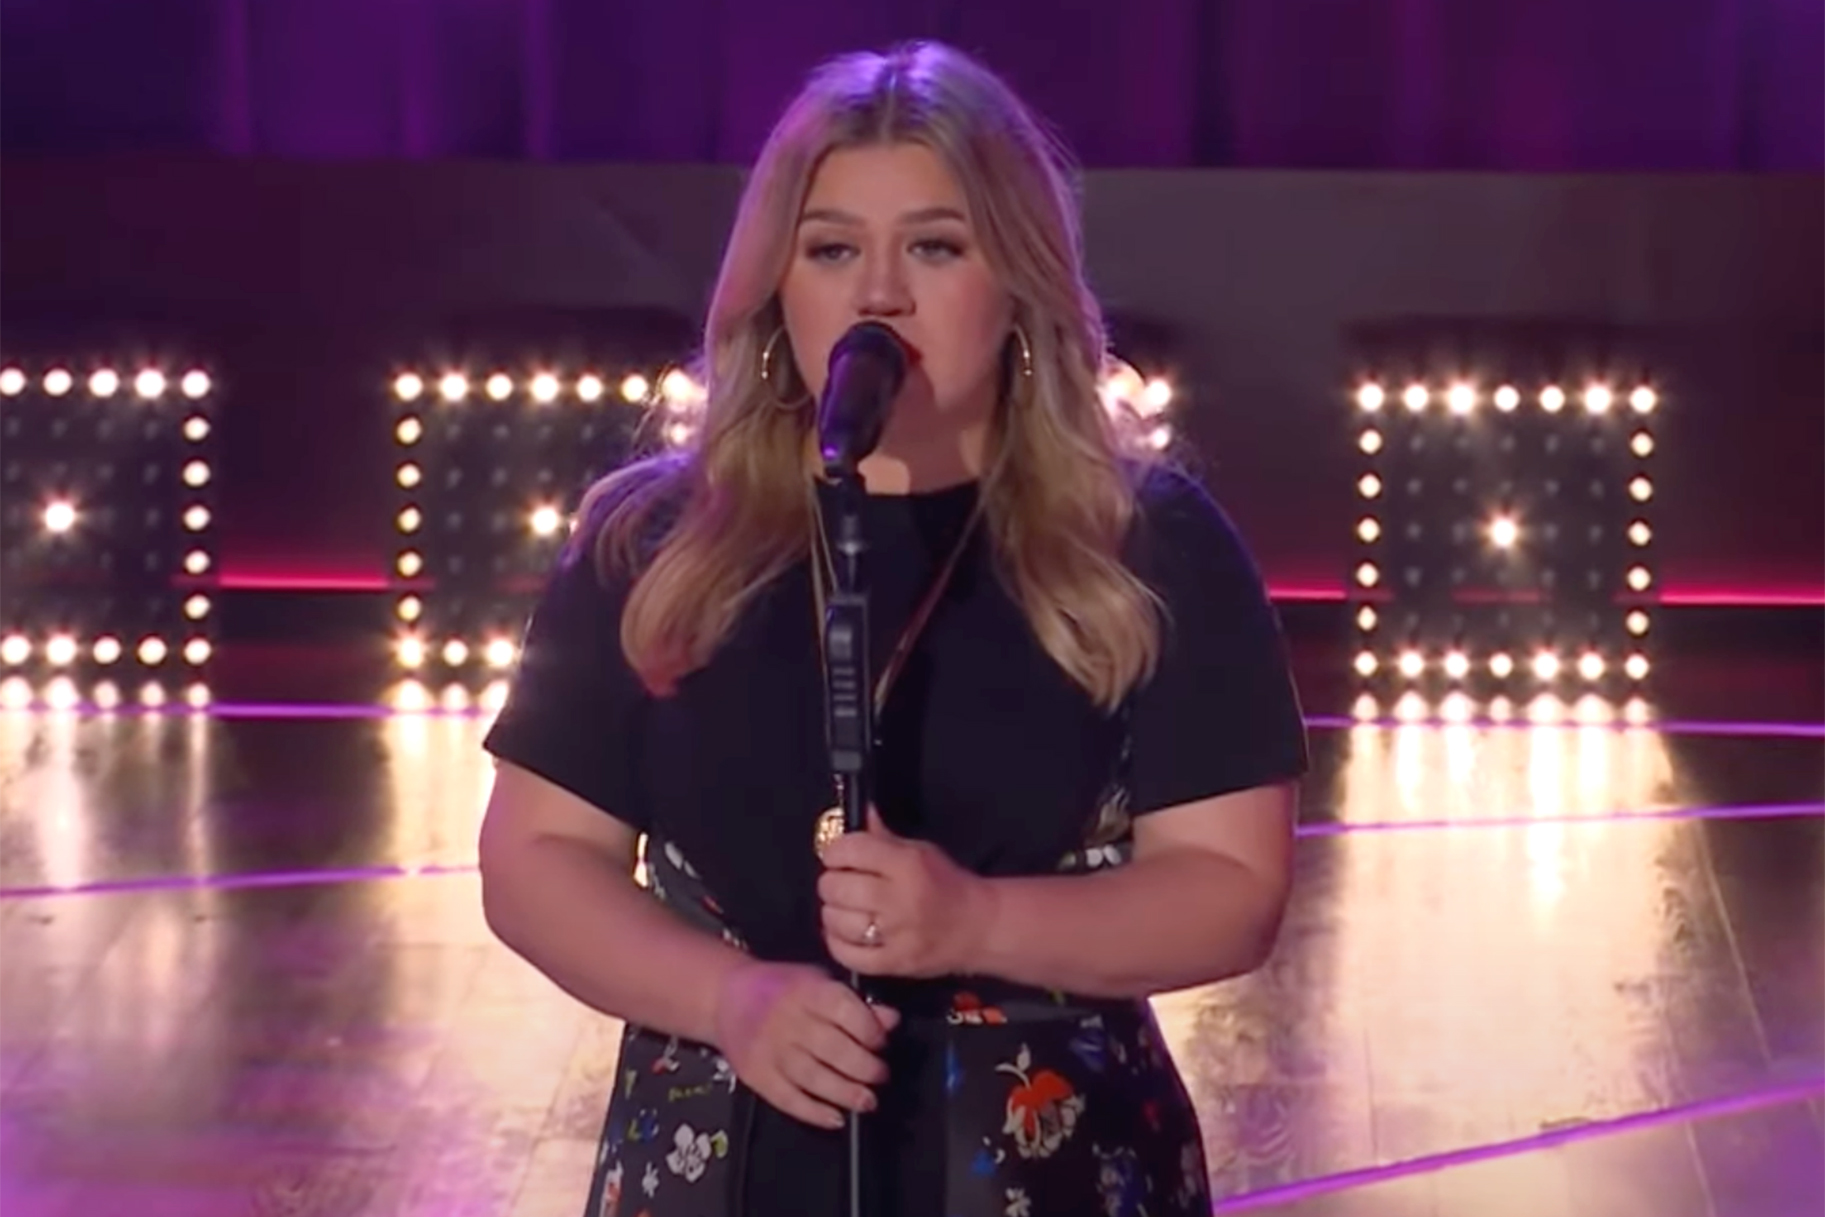 Kelly Clarkson Performs on the Kelly Clarkson Show